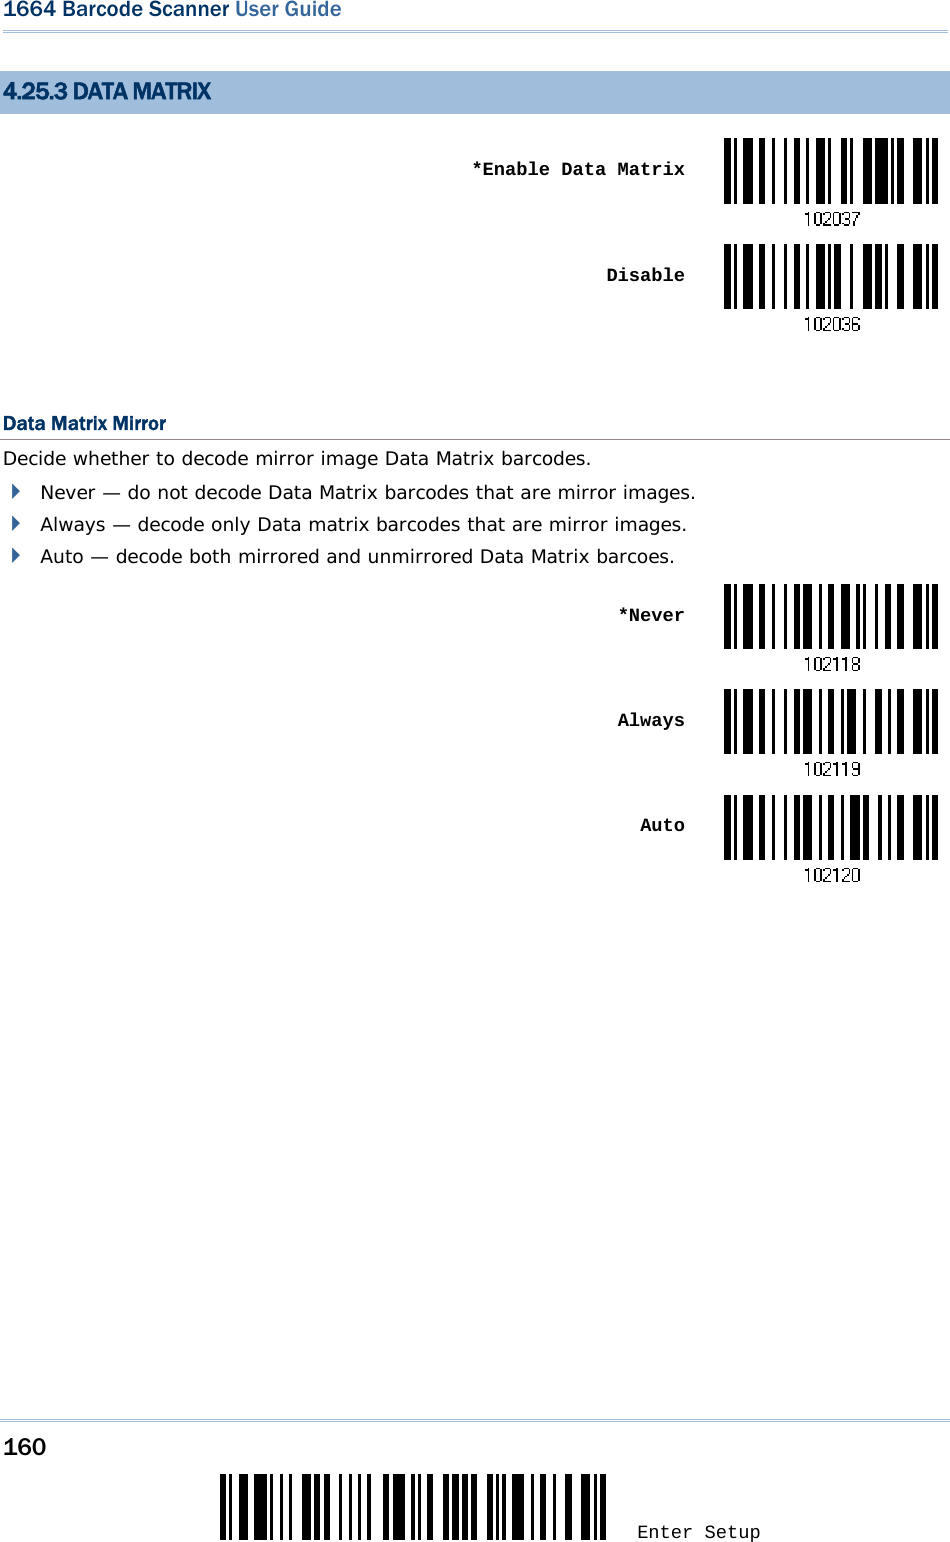 160 Enter Setup 1664 Barcode Scanner User Guide  4.25.3 DATA MATRIX  *Enable Data Matrix Disable Data Matrix Mirror Decide whether to decode mirror image Data Matrix barcodes.  Never — do not decode Data Matrix barcodes that are mirror images.  Always — decode only Data matrix barcodes that are mirror images.  Auto — decode both mirrored and unmirrored Data Matrix barcoes.  *Never Always Auto